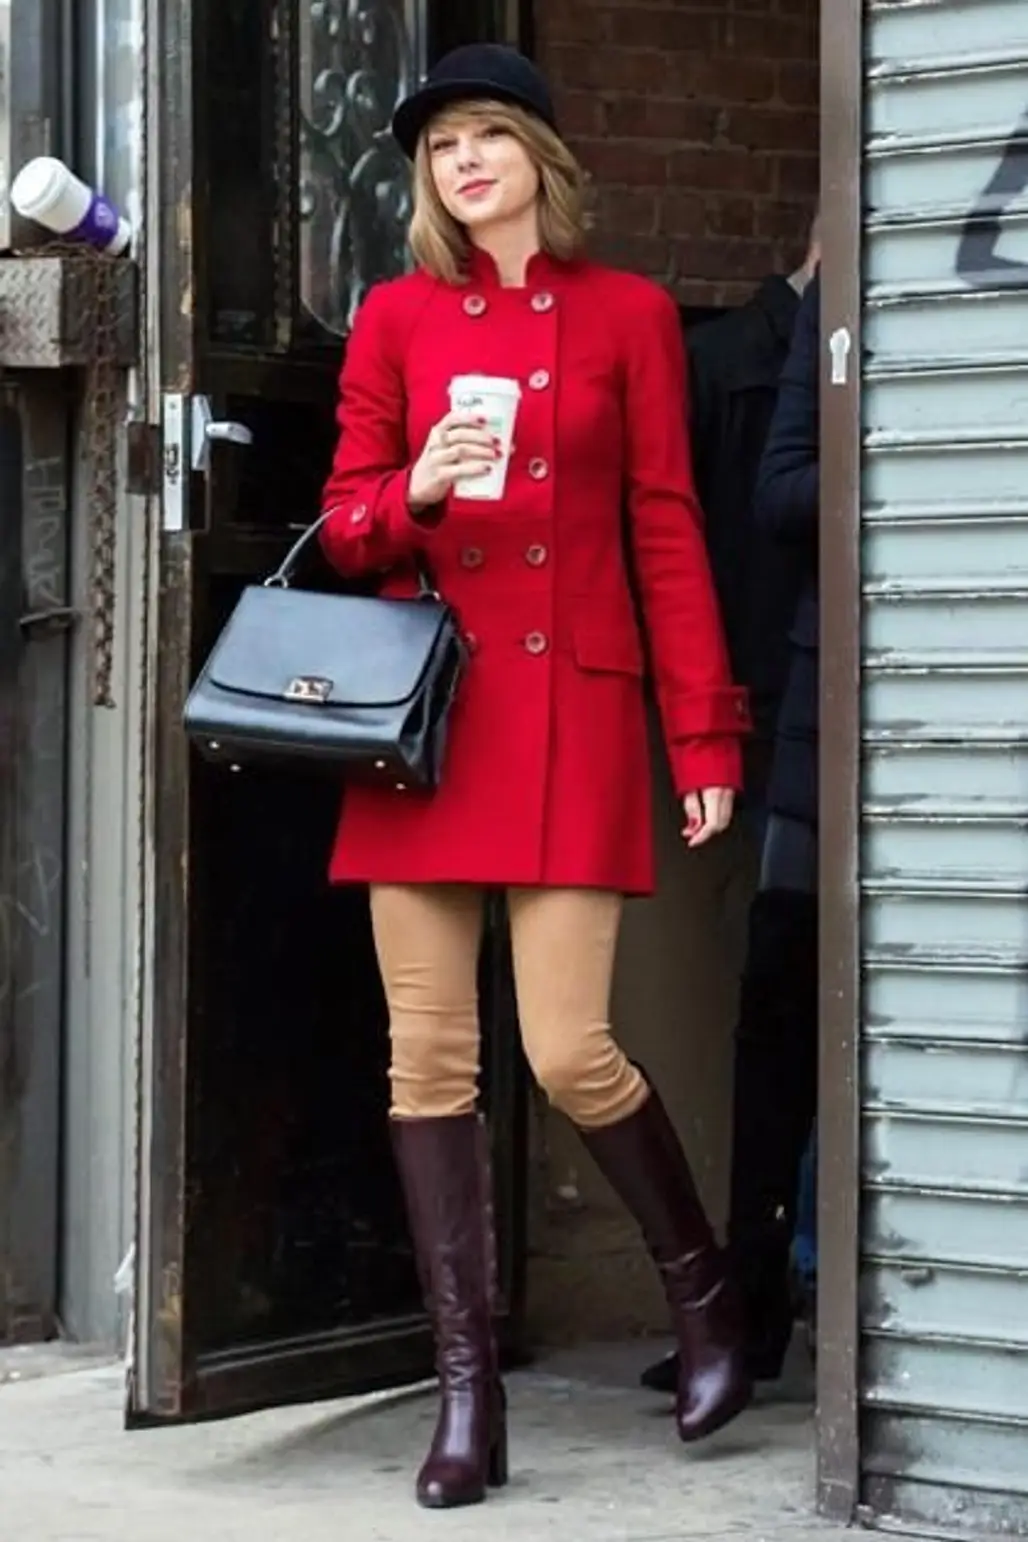 Red Coat and Riding Boots